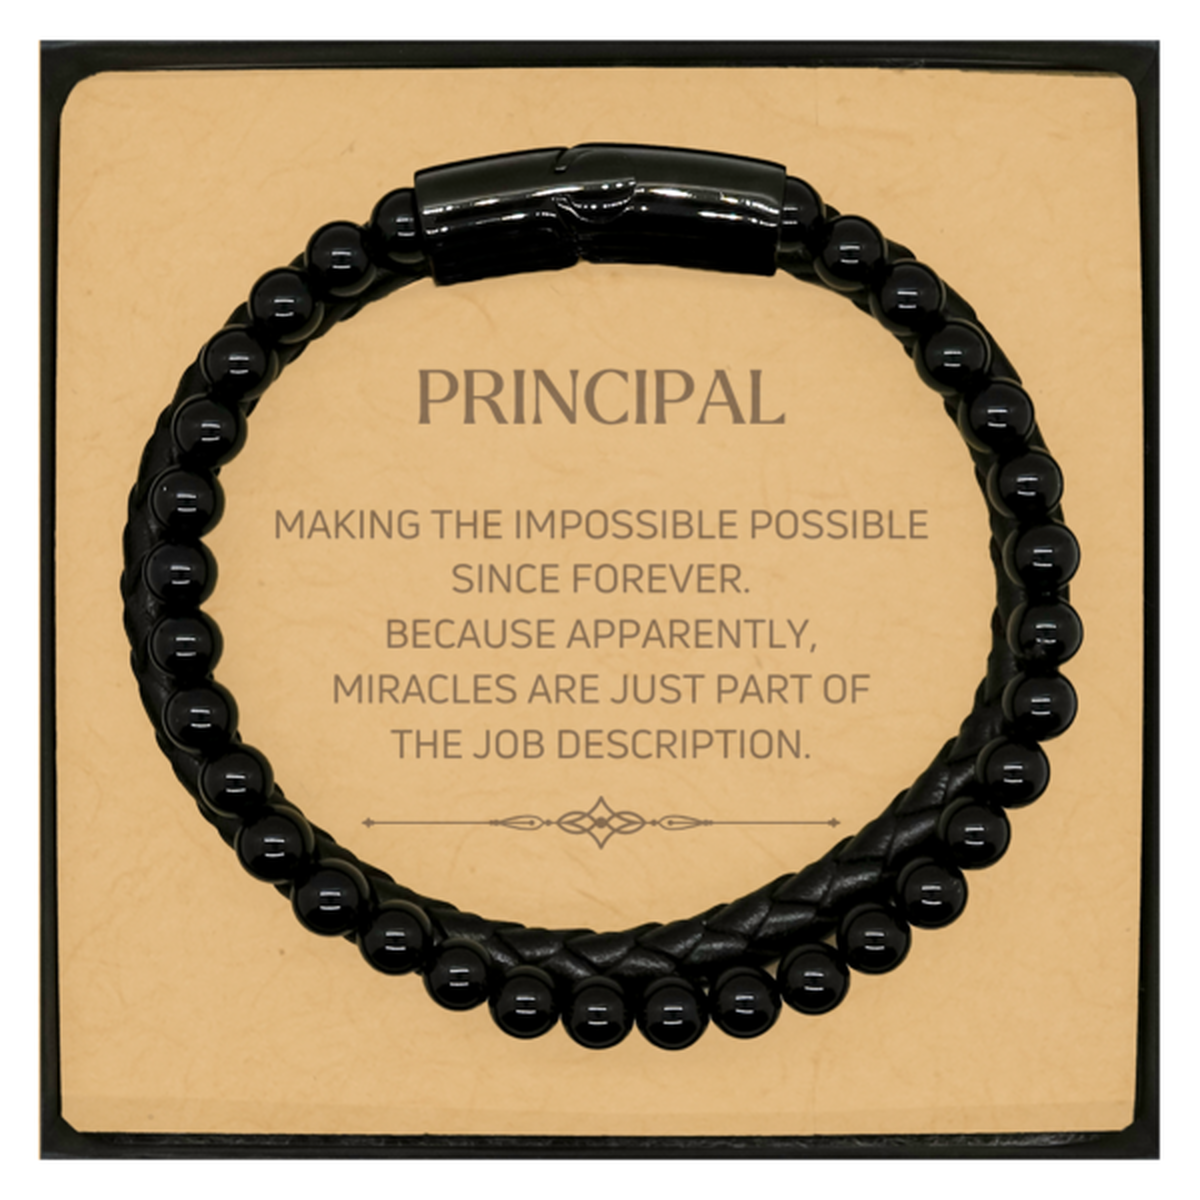 Funny Principal Gifts, Miracles are just part of the job description, Inspirational Birthday Christmas Stone Leather Bracelets For Principal, Men, Women, Coworkers, Friends, Boss